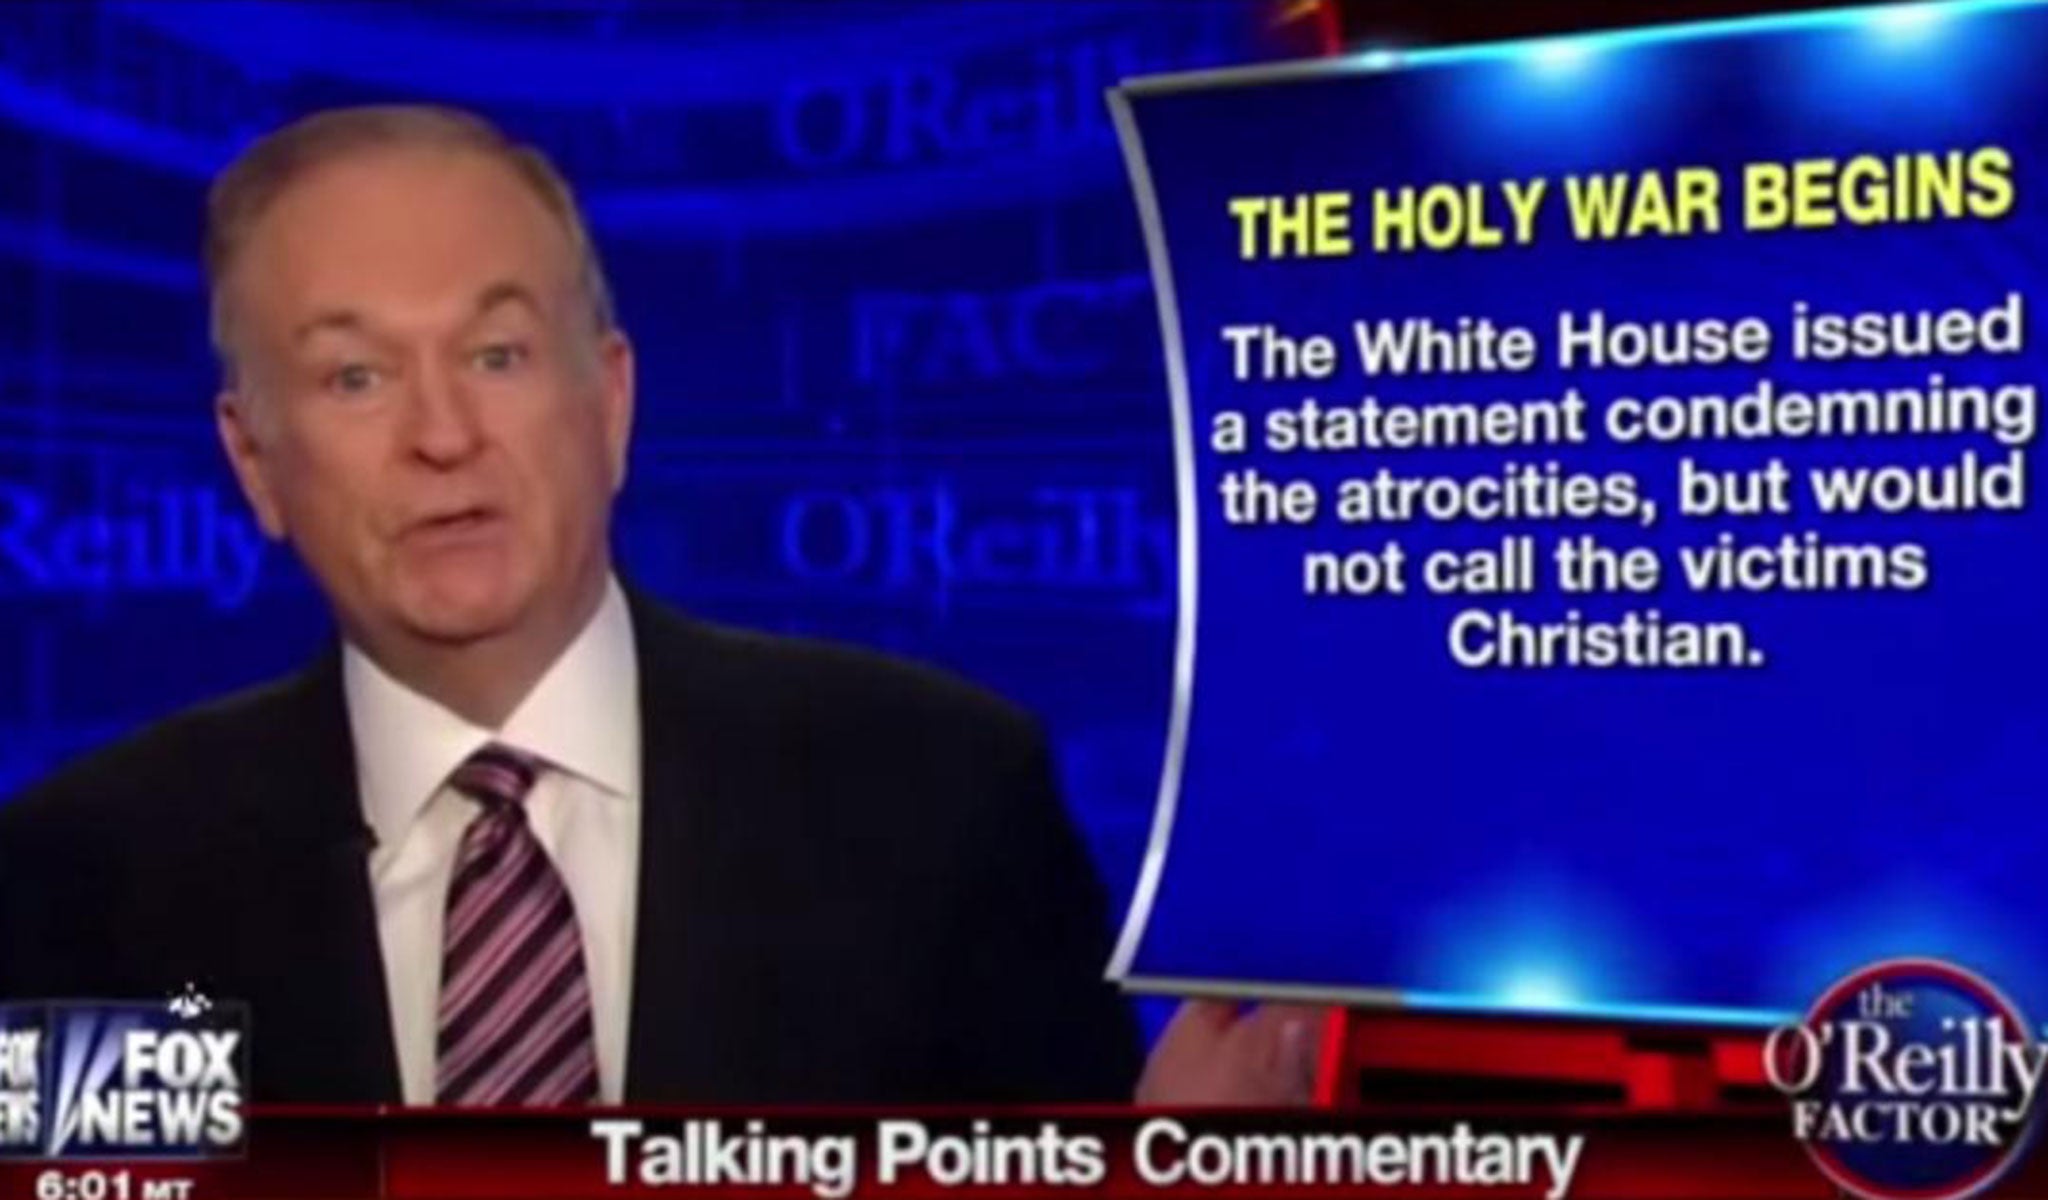 Bill O'Reilly declares 'the holy war is here' on Fox News